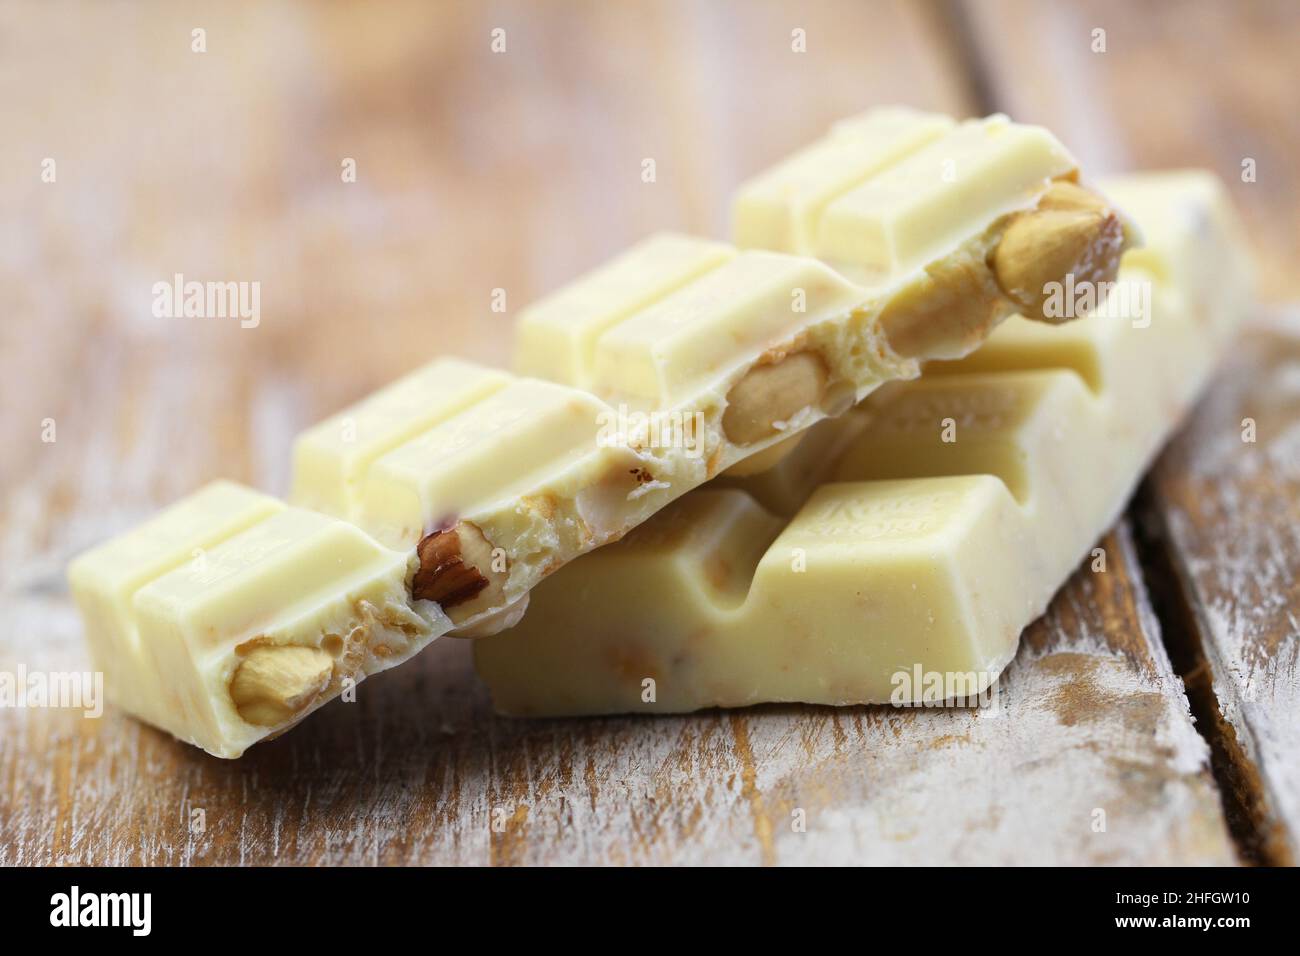 Two pieces of delicious and creamy white chocolates with hazelnuts on rustic wooden surface Stock Photo